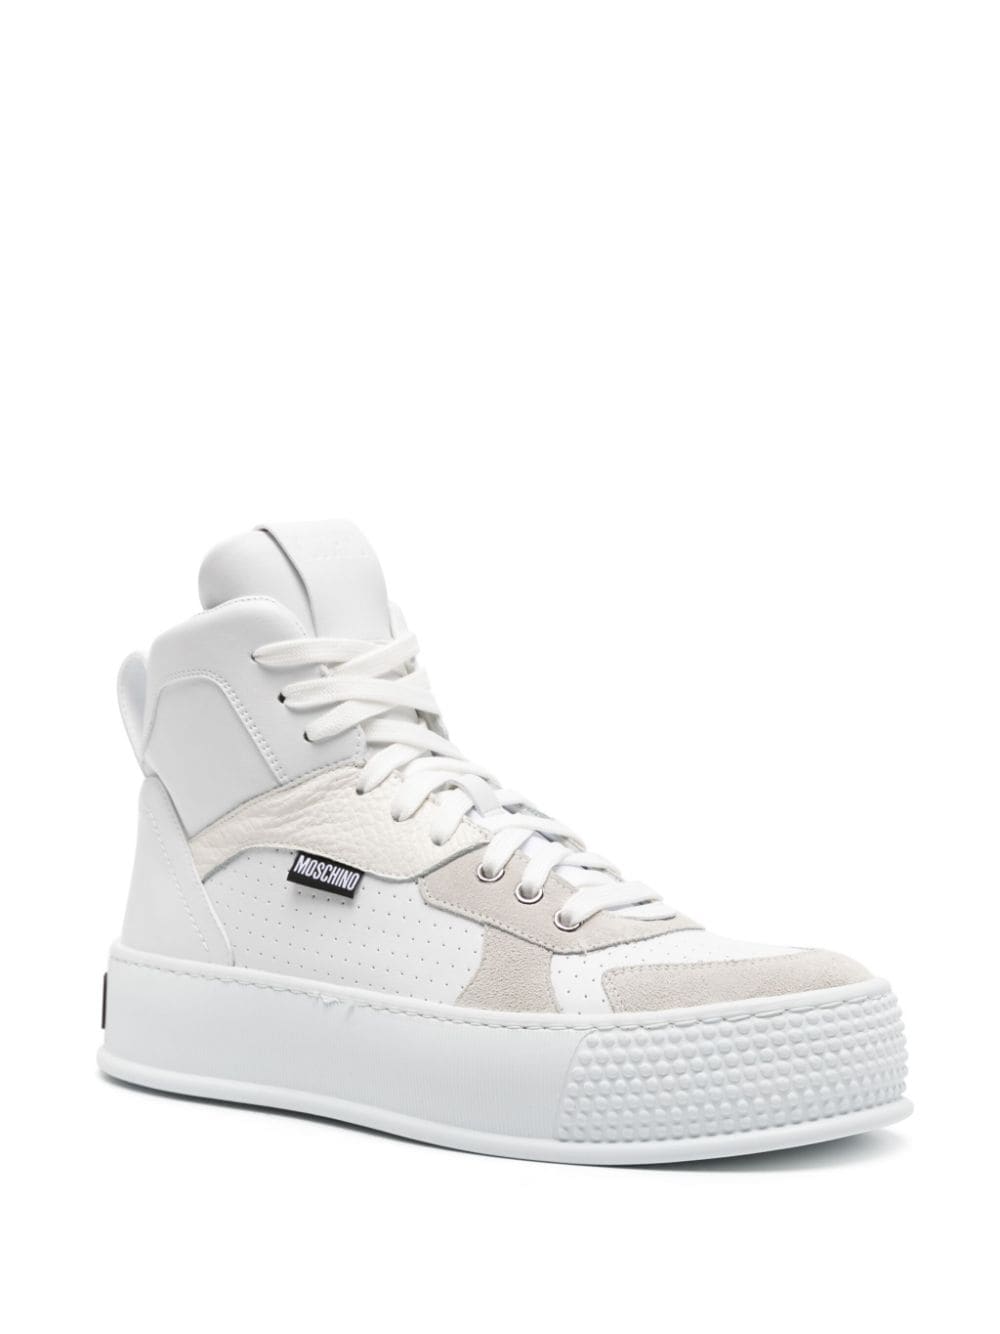 Shop Moschino Bumps & Stripes High-top Sneakers In White